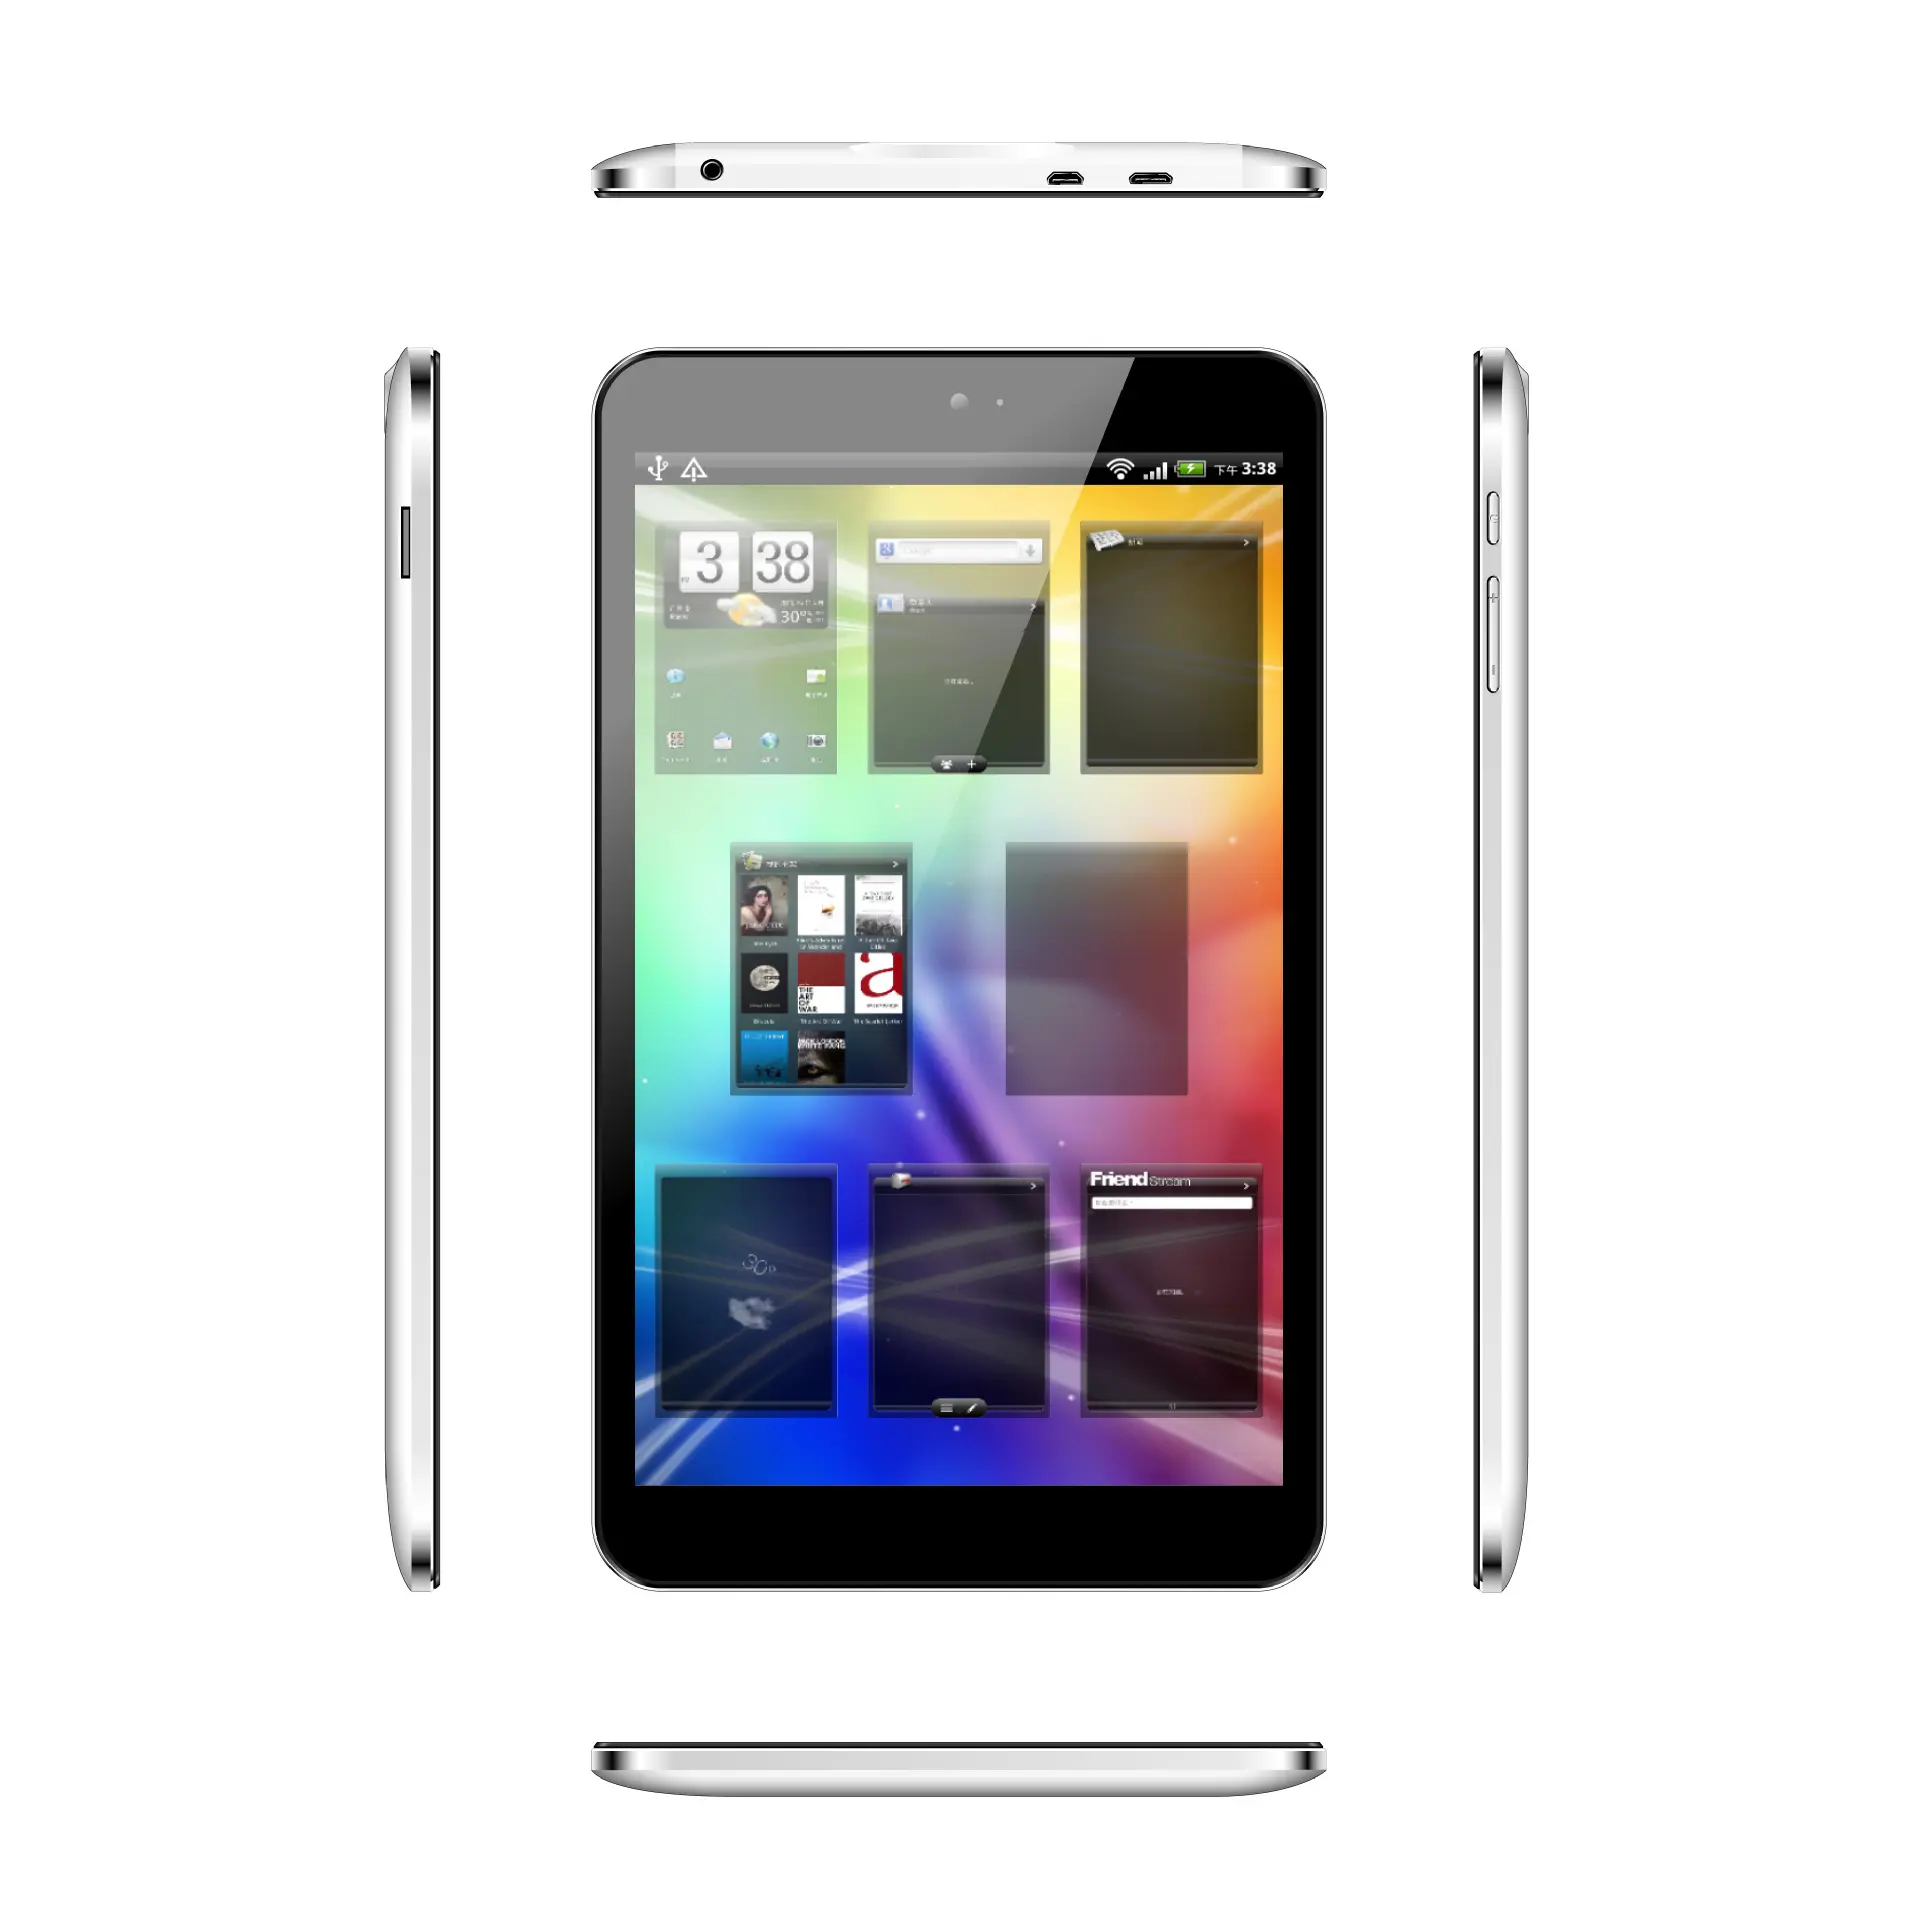 S8 RK3368 tablet 8 inch ,oem 8 inch android 2gb ram display tablet 4g LTE GPS wifi 32 gb rom mutil touch tablet ,7 inch 8 gb